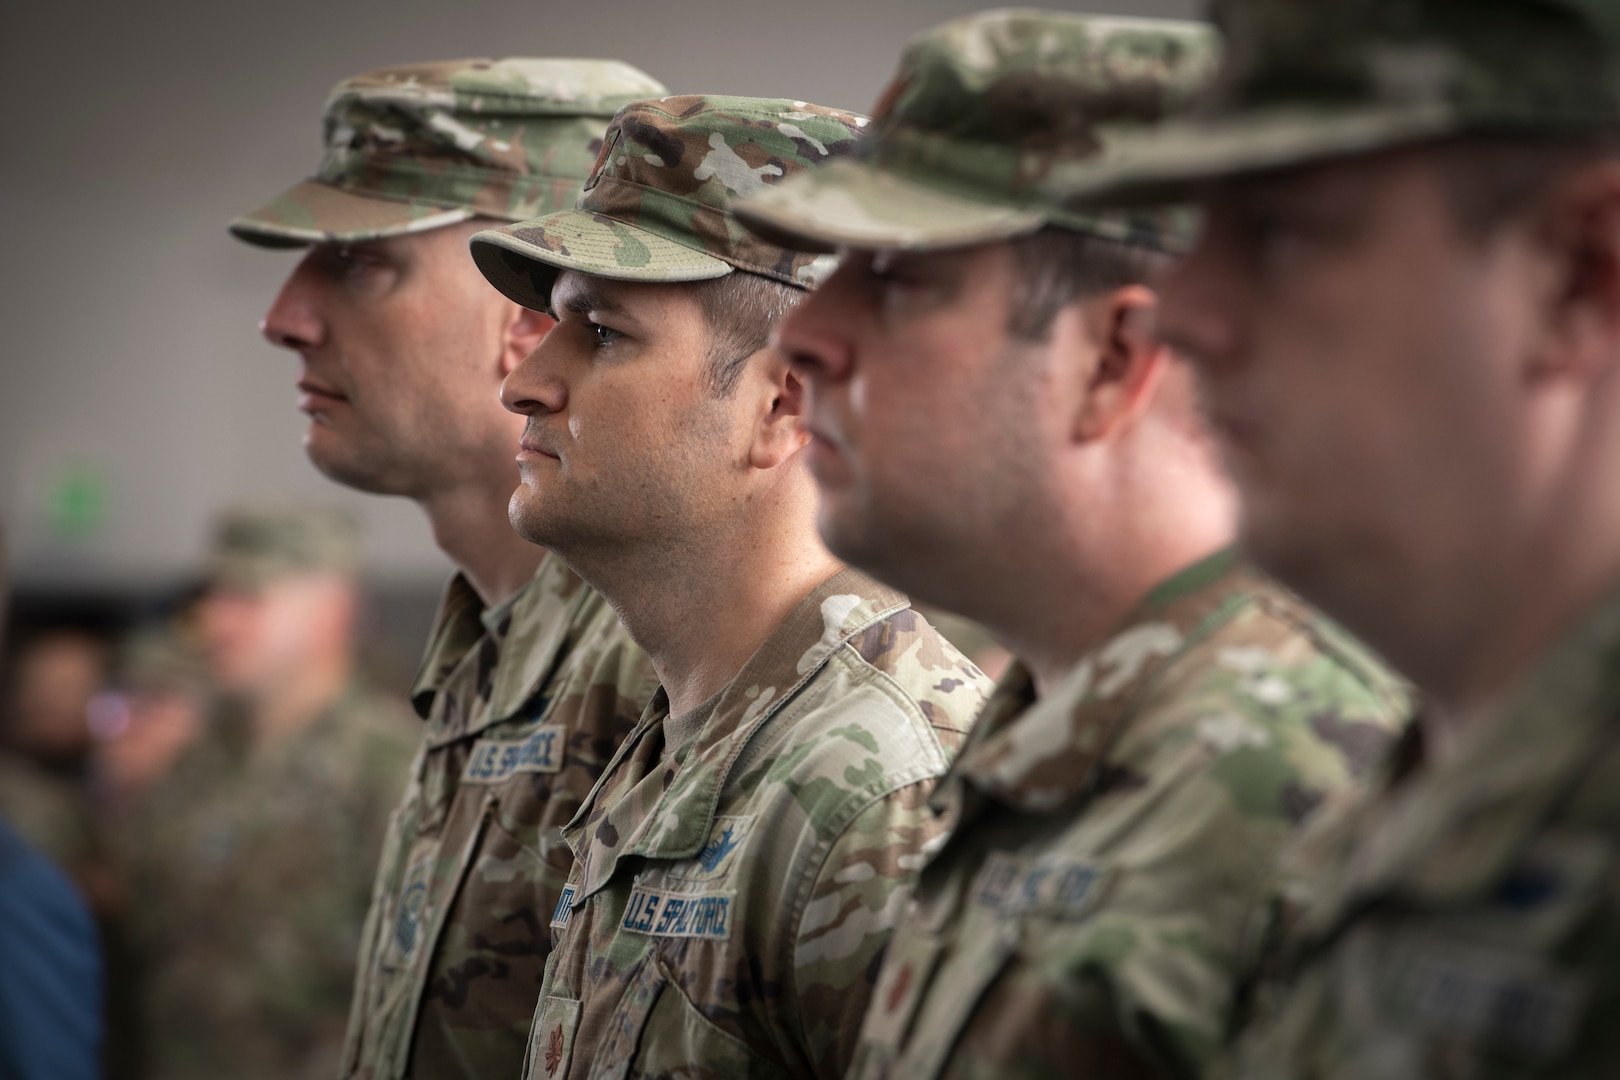 Four military members standing at attention